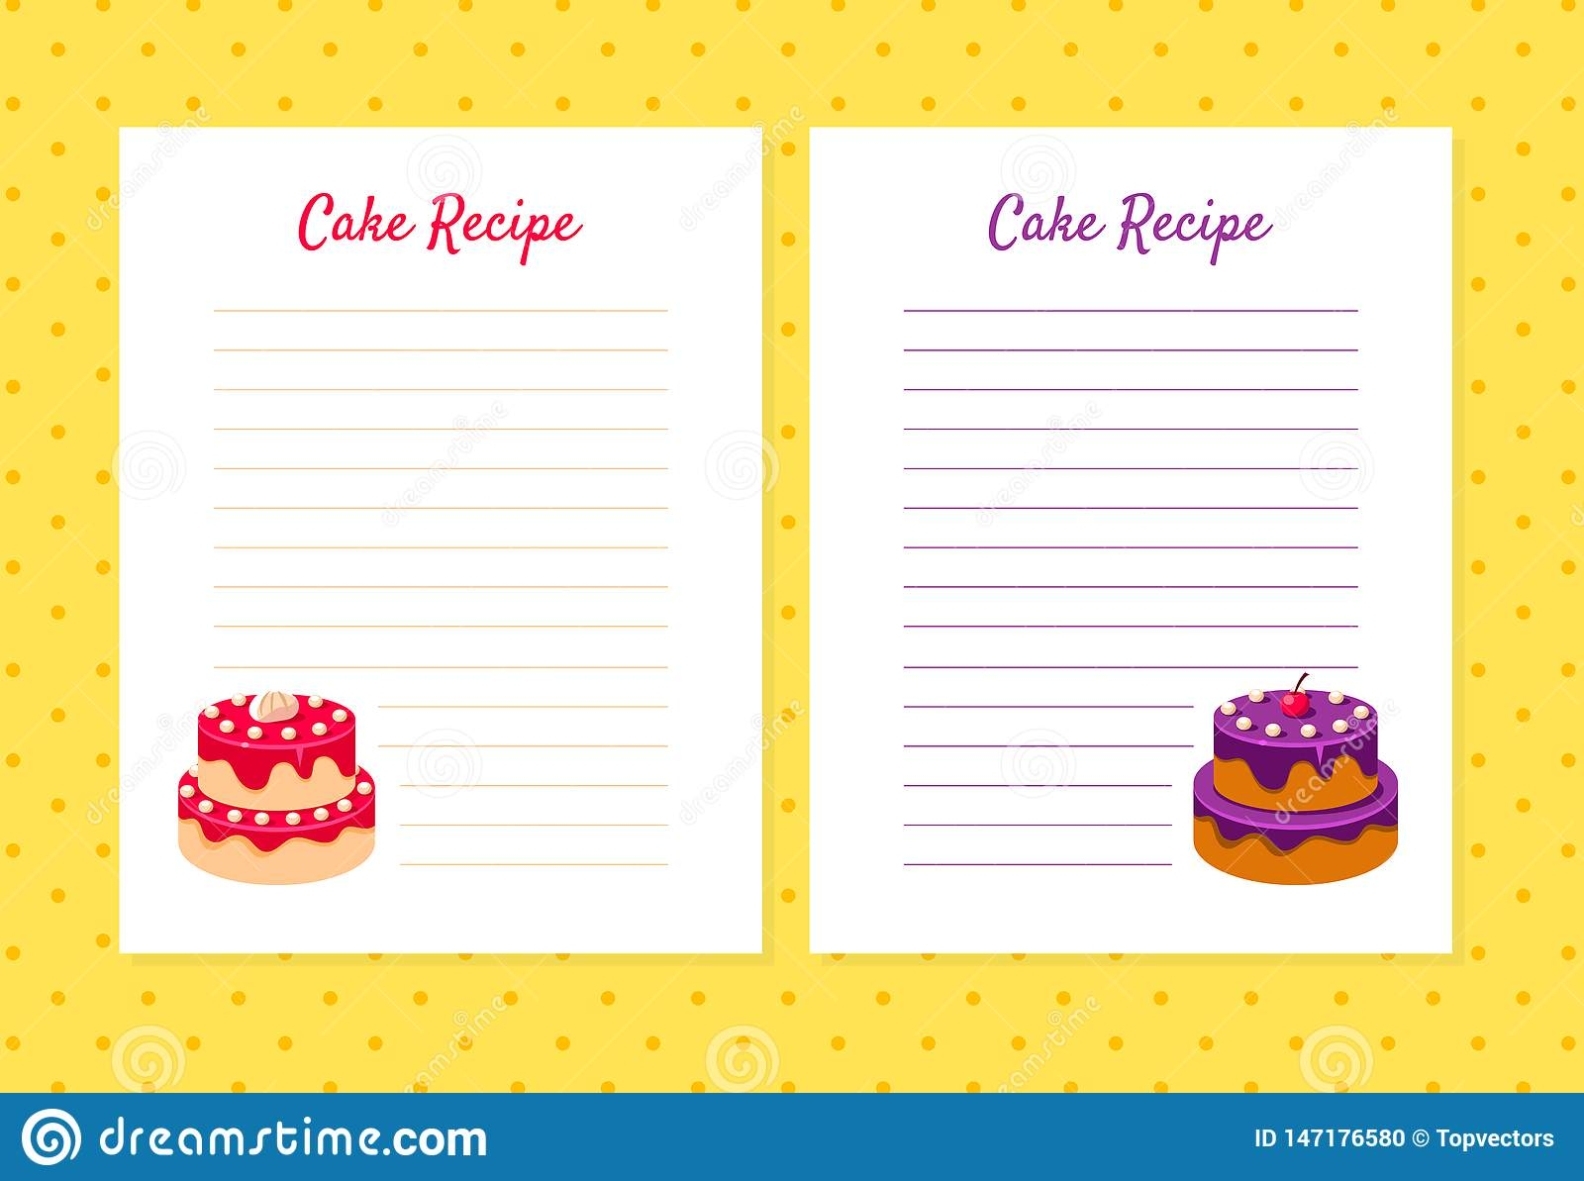 Cake Recipe Cookbook Design Templates, Card With Lines For Recipe Placement Vector Illustration with Recipe Card Design Template